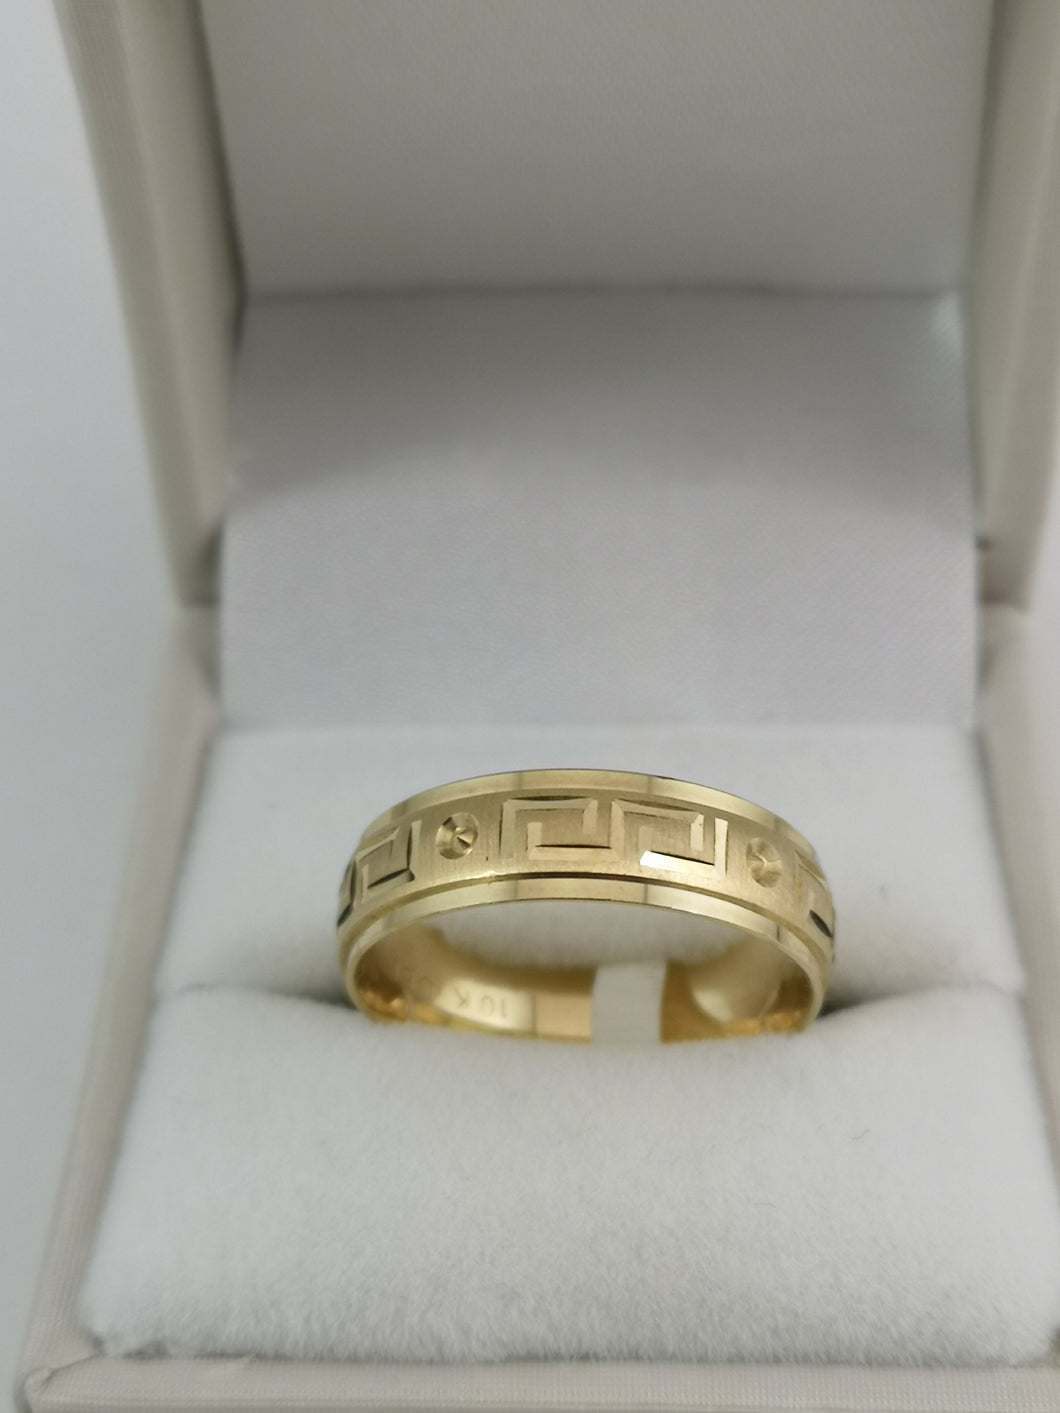 10 KY Gold Band